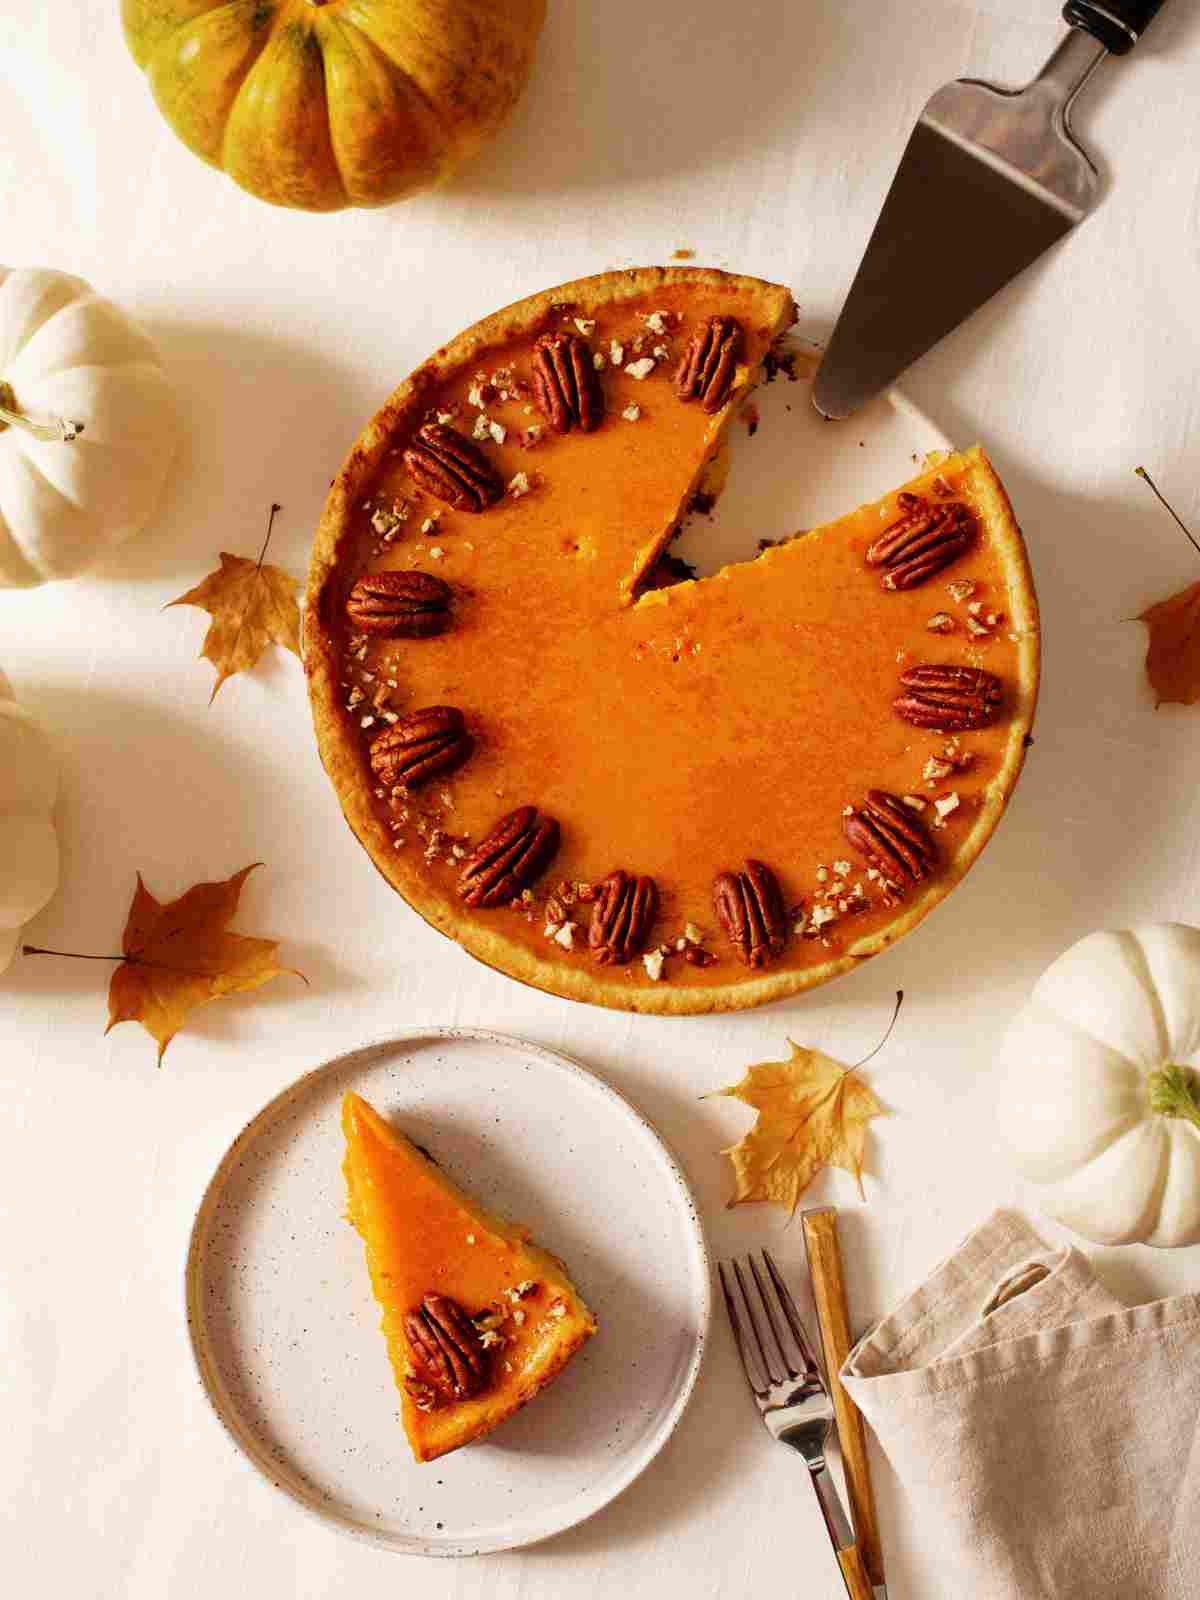 Image with delicious pumpkin pie topped with nuts chefd.com.